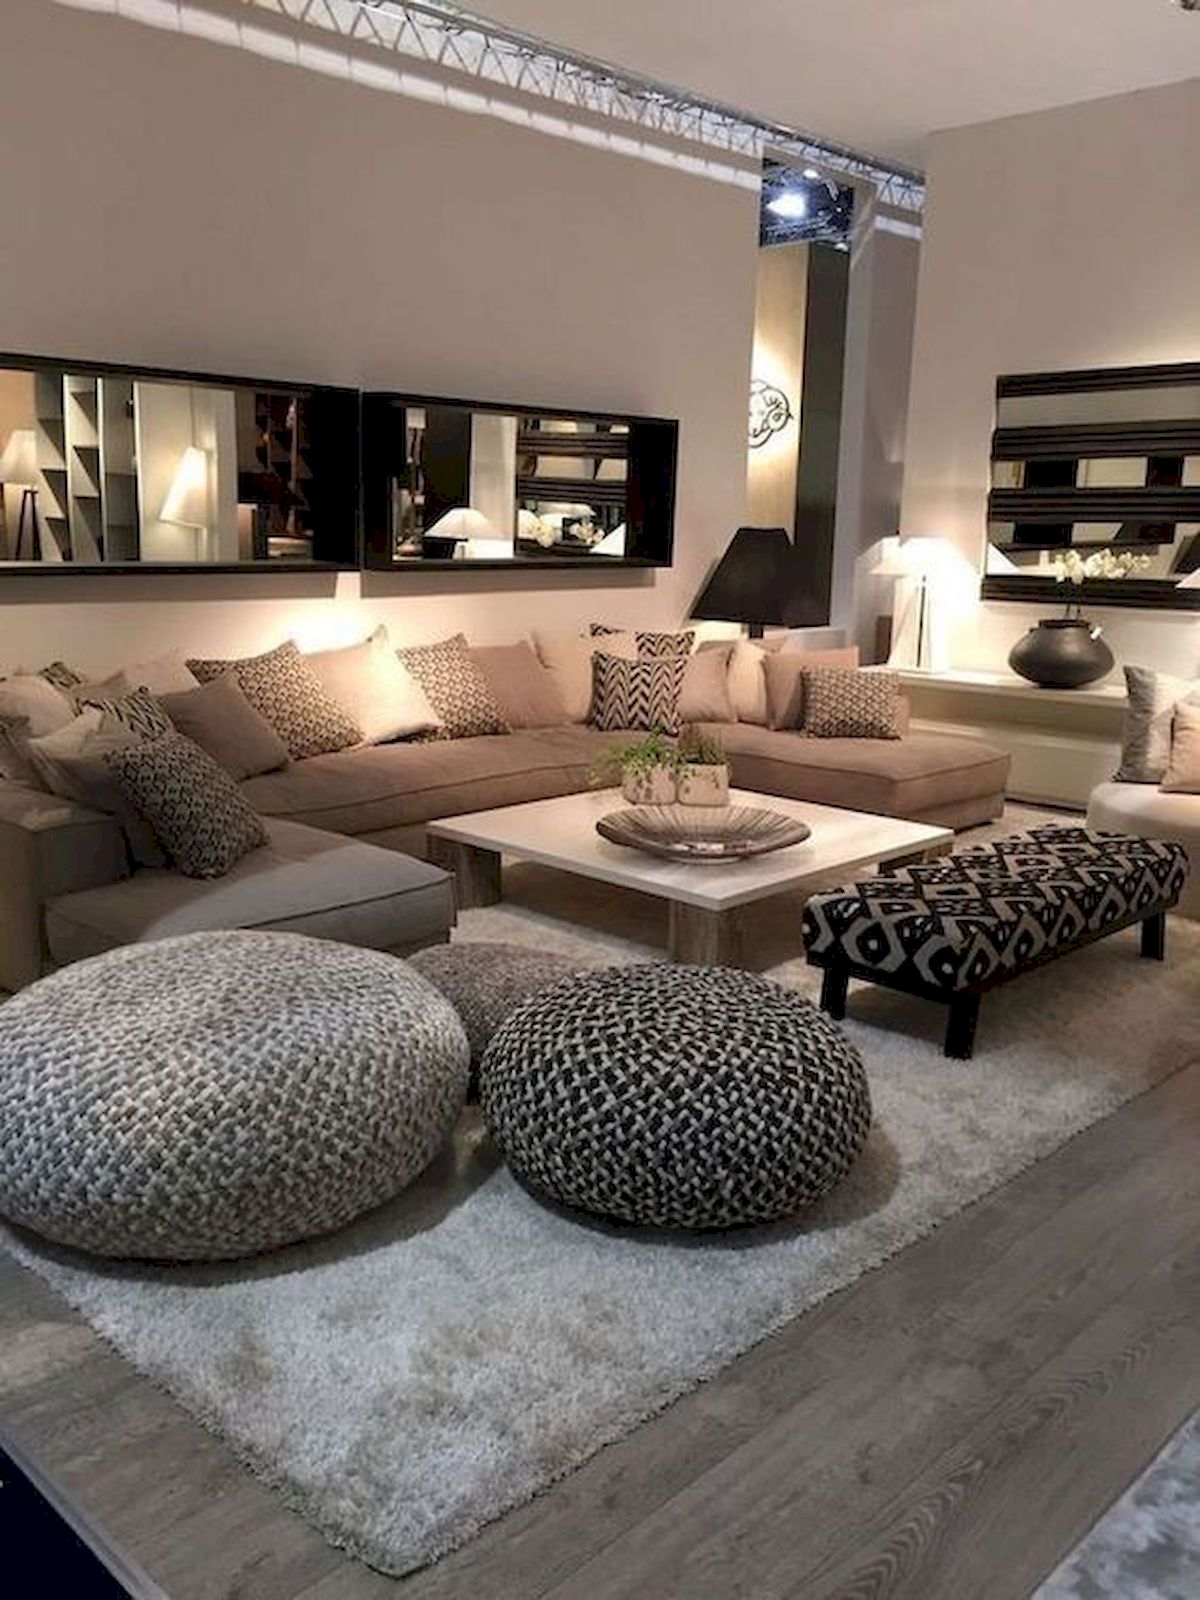 36 Elegant Living Room Design And Decor Ideas That You Will Love (29)